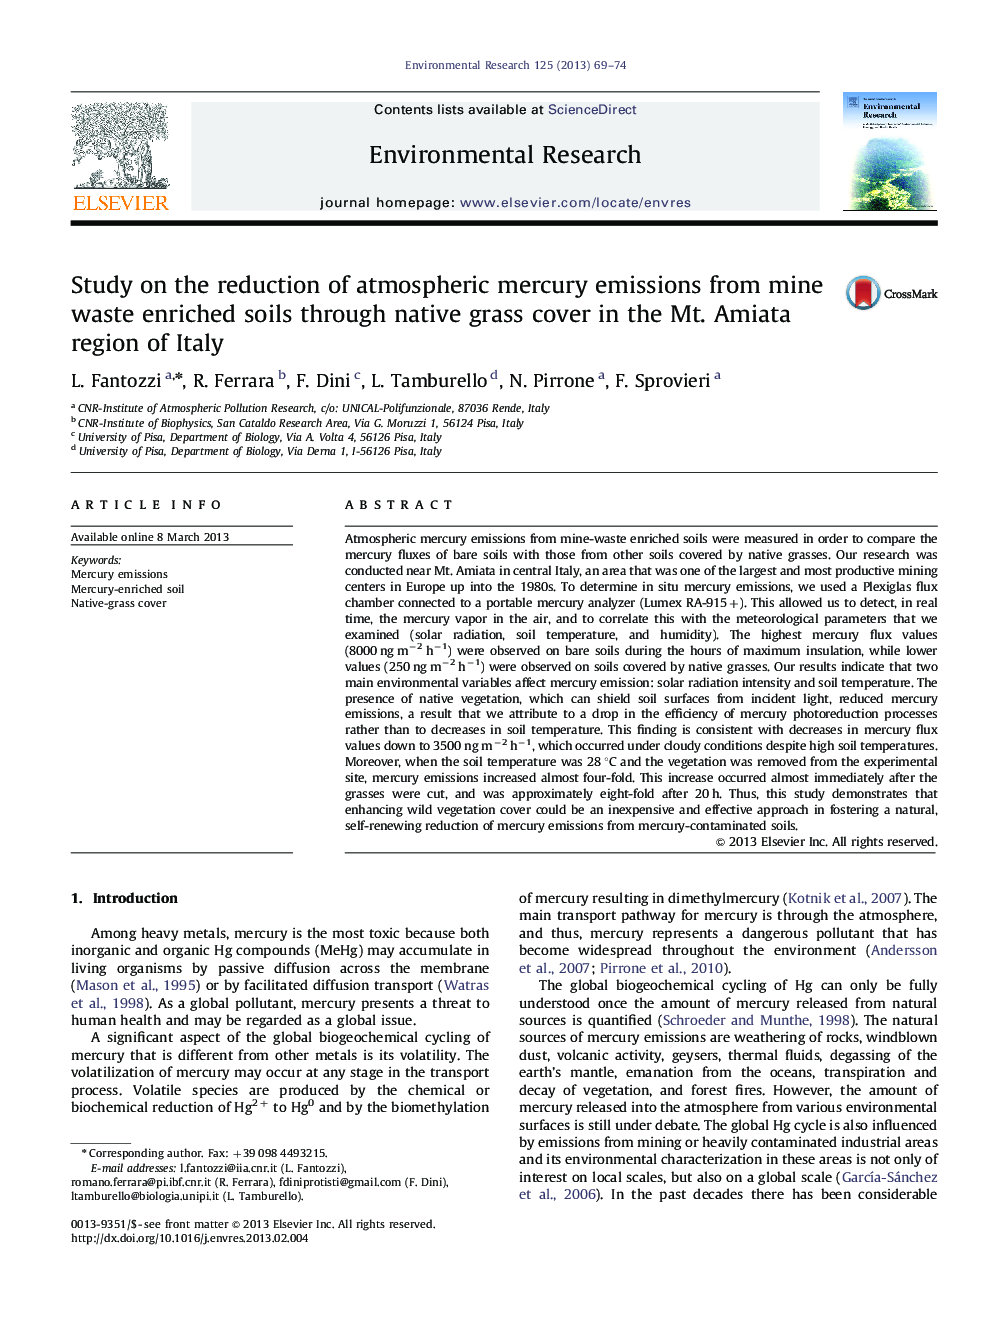 Study on the reduction of atmospheric mercury emissions from mine waste enriched soils through native grass cover in the Mt. Amiata region of Italy